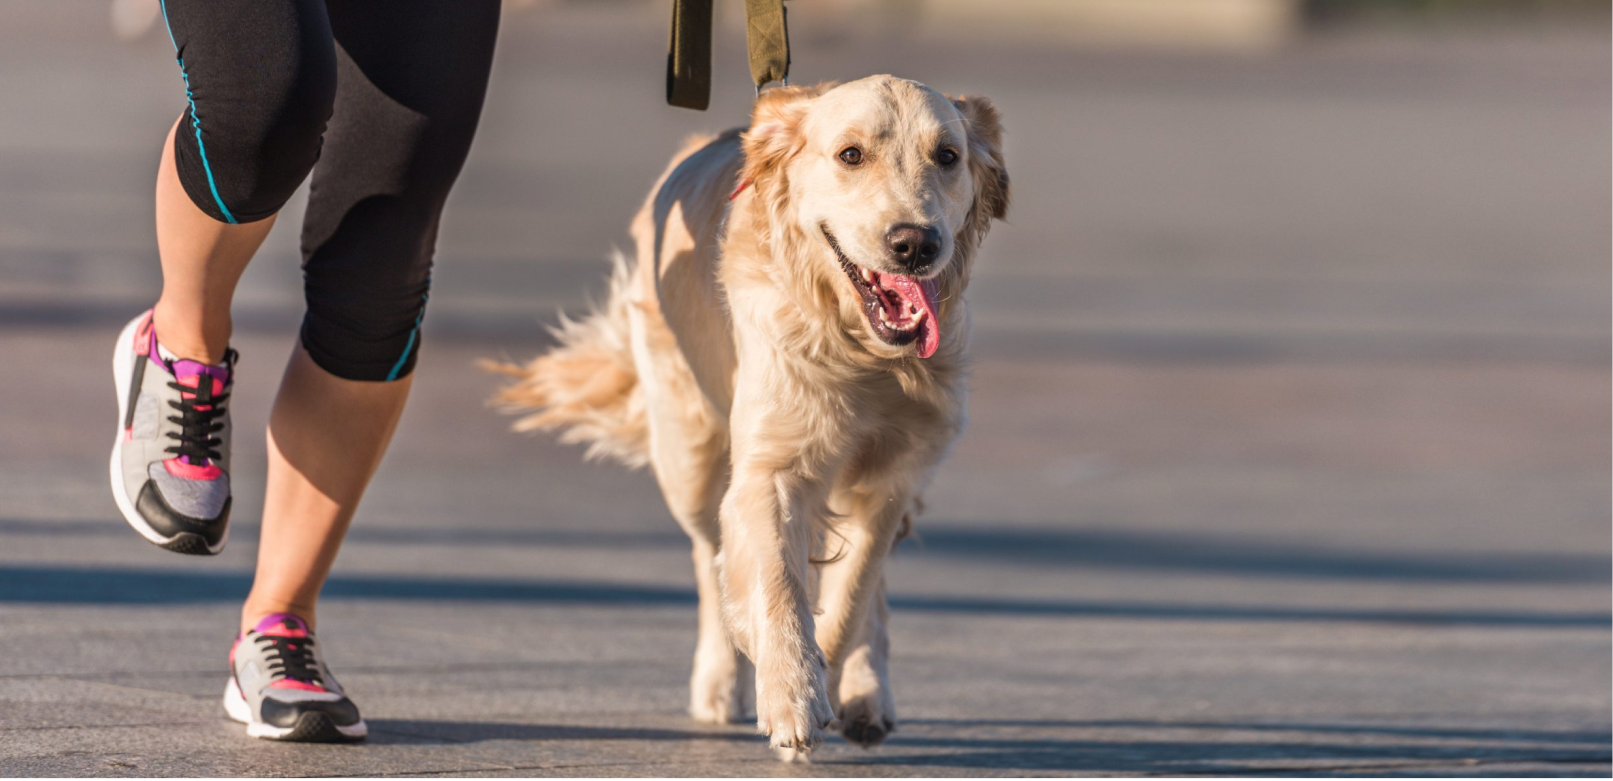 Dogs That Can Run With You: 10 Best Dogs for Running